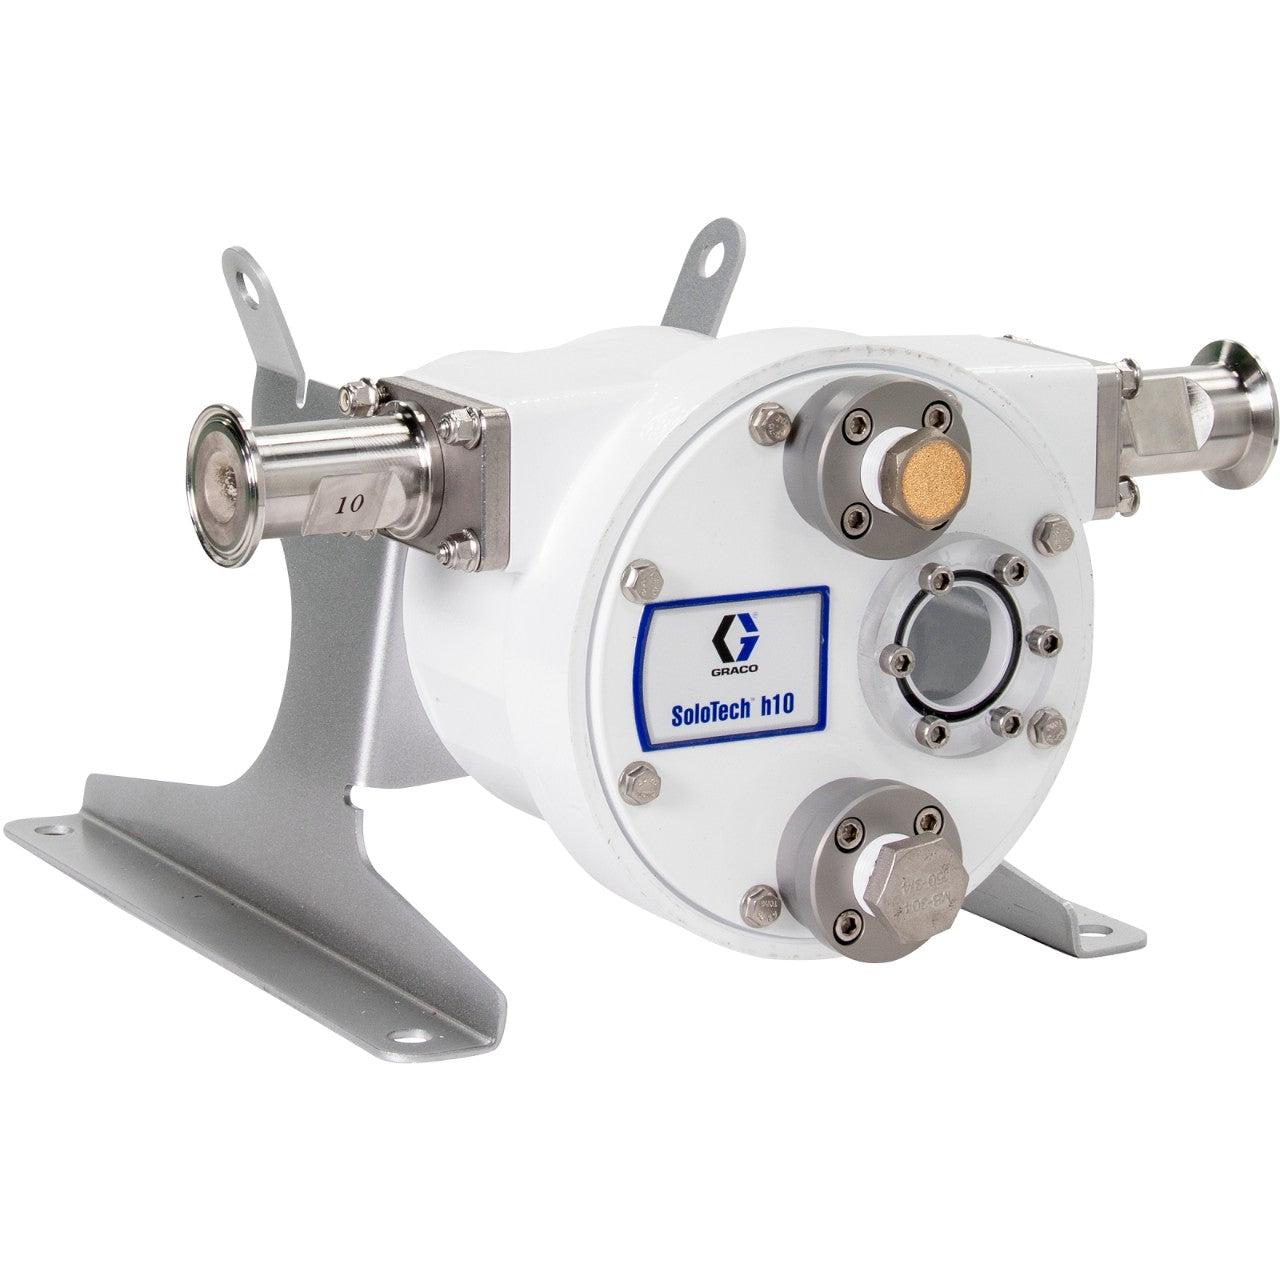 SoloTechª h10 Peristaltic Pump, No Motor or gear reducer, FDA Nitrile Hose, SST Sanitary Clamp Barb